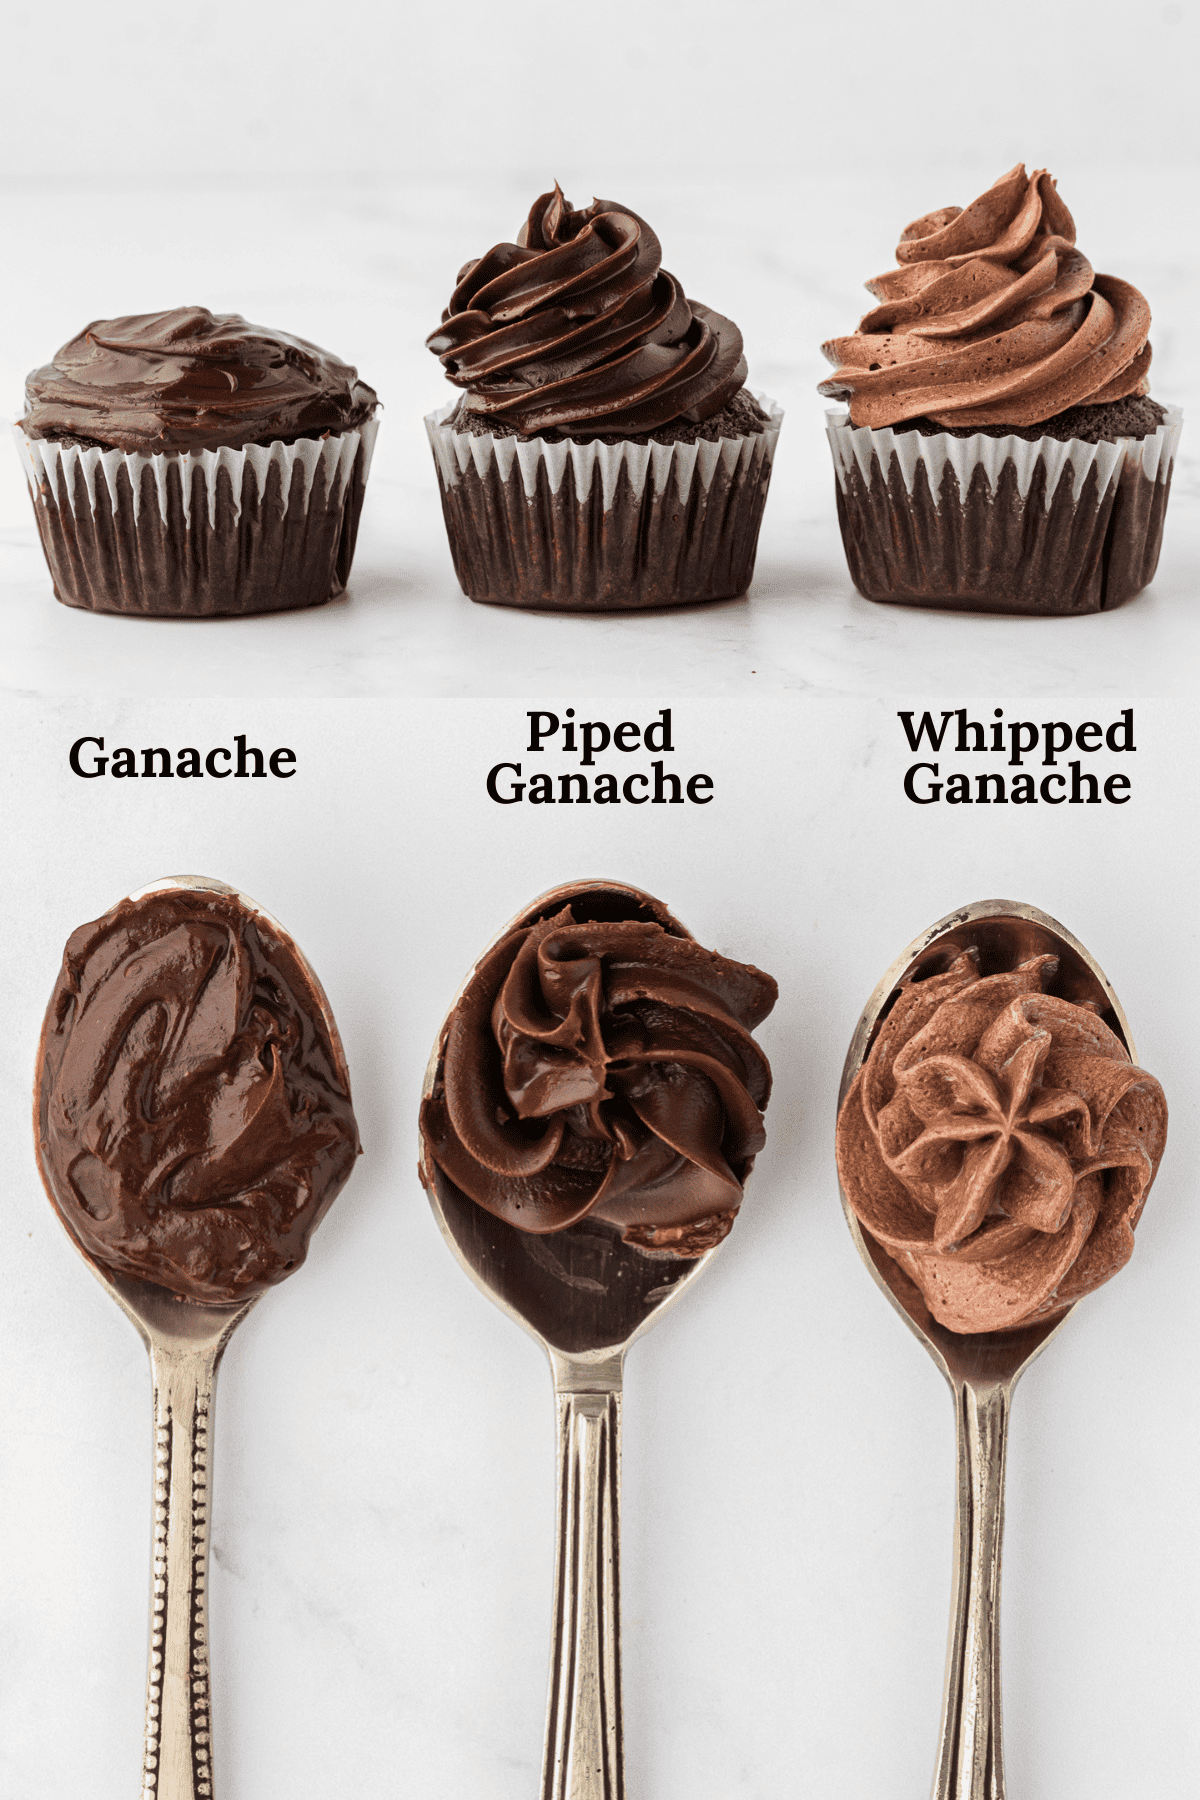 three types of ganache laid out on top of cupcakes and on spoonds, labeled with Ganache, Piped Ganache, and Whipped Ganache